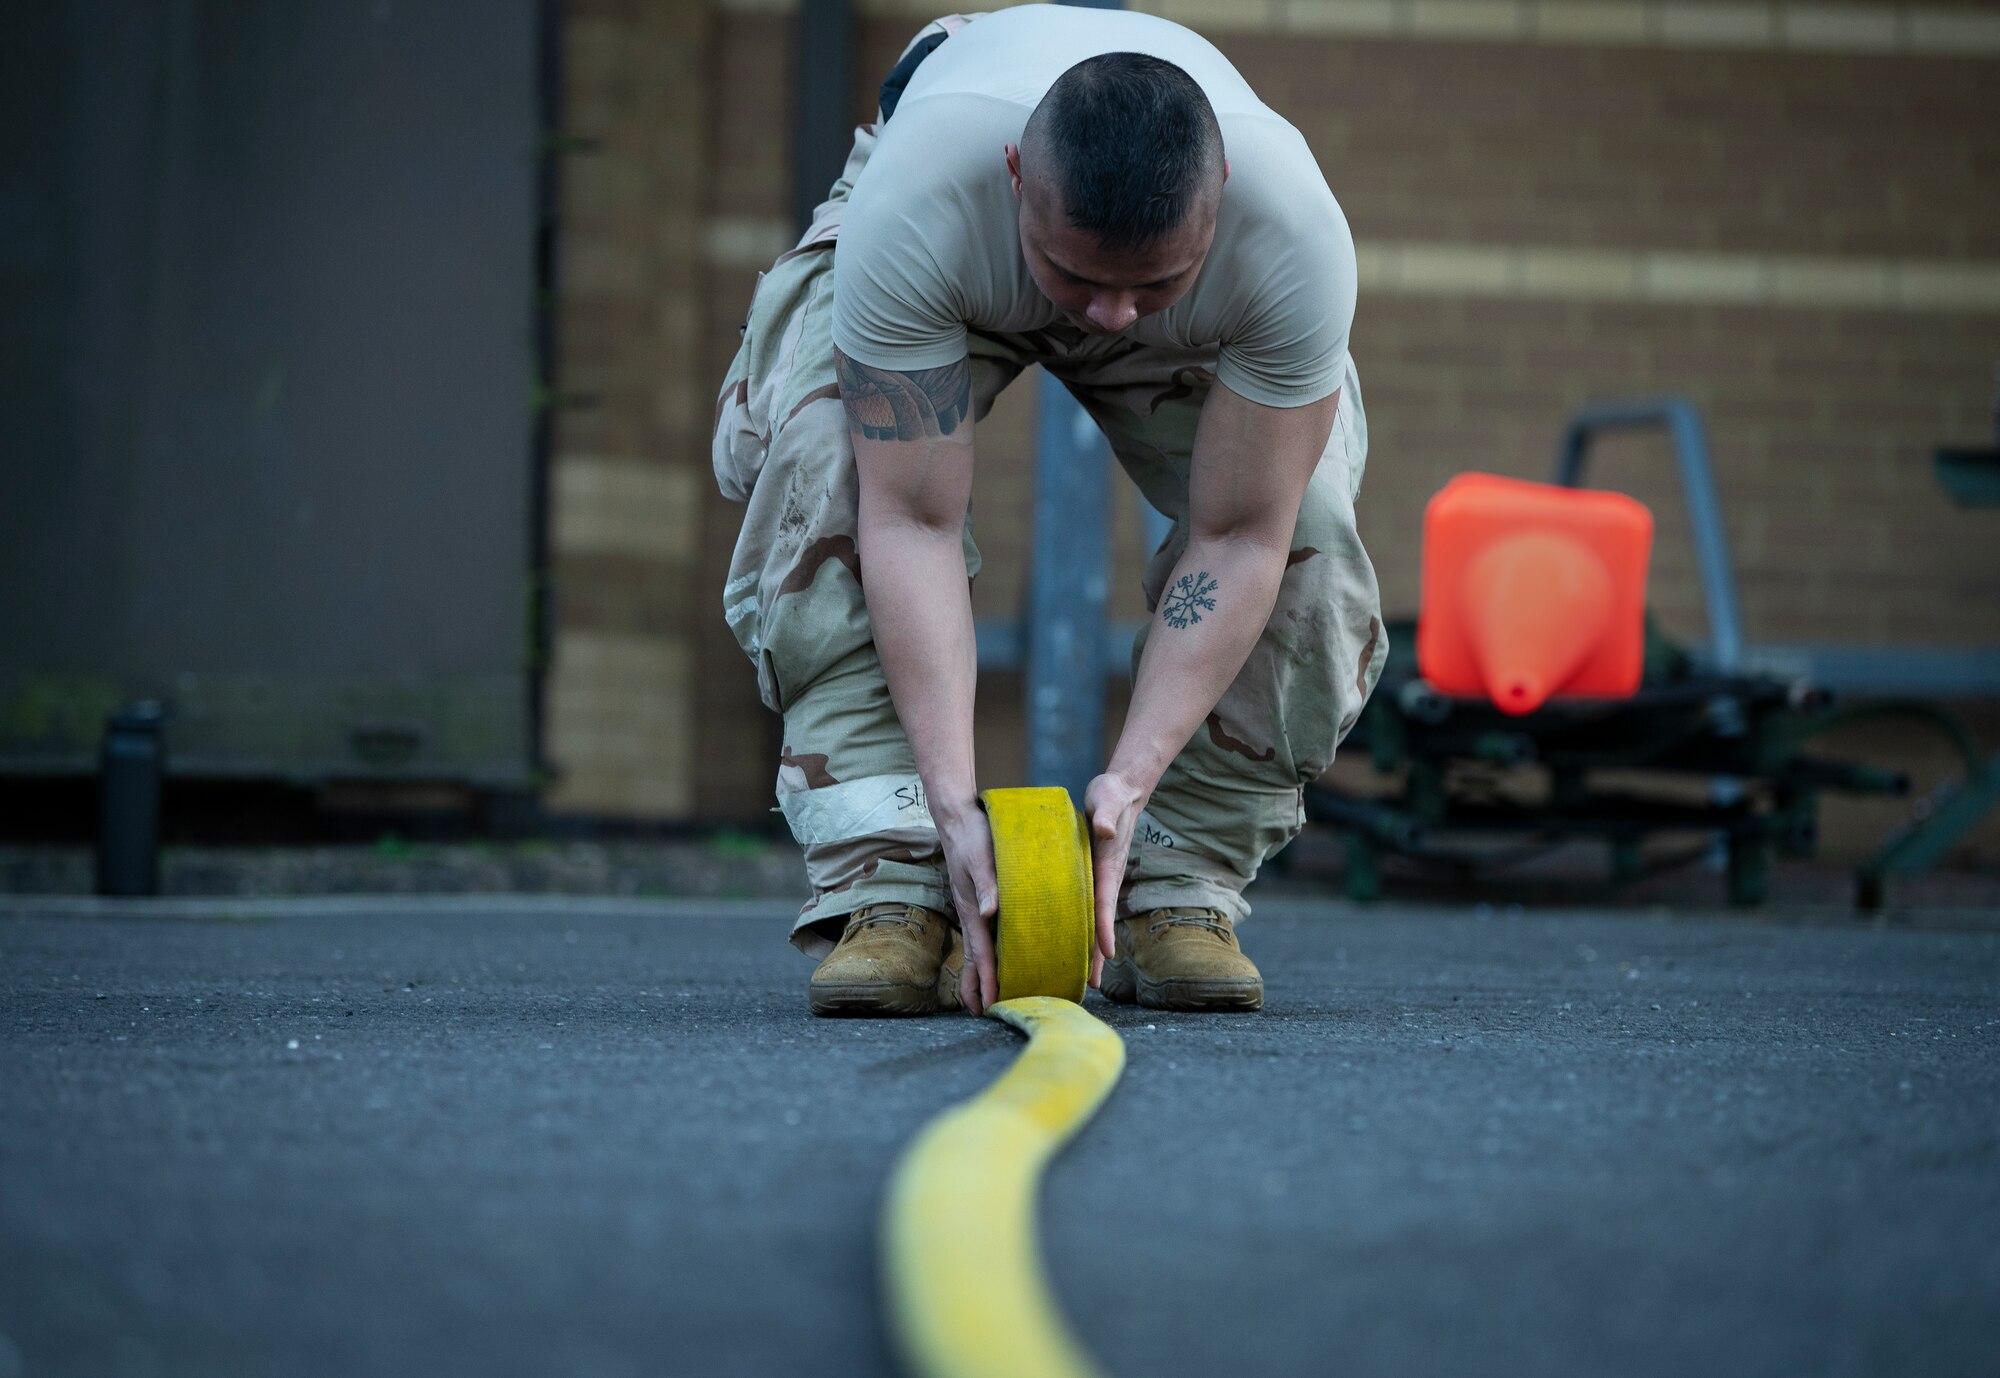 An Airman assigned to the 48th Medical Group cleans up a decontamination zone during a ‘Furious 48’ exercise at Royal Air Force Lakenheath, England, Feb. 12, 2020.  Exercises like this provide both aircrew and support personnel stationed at the Liberty Wing the experience needed to maintain a ready force capable of operating and surviving in any contingency environment. (U.S. Air Force photo by Airman 1st Class Madeline Herzog)